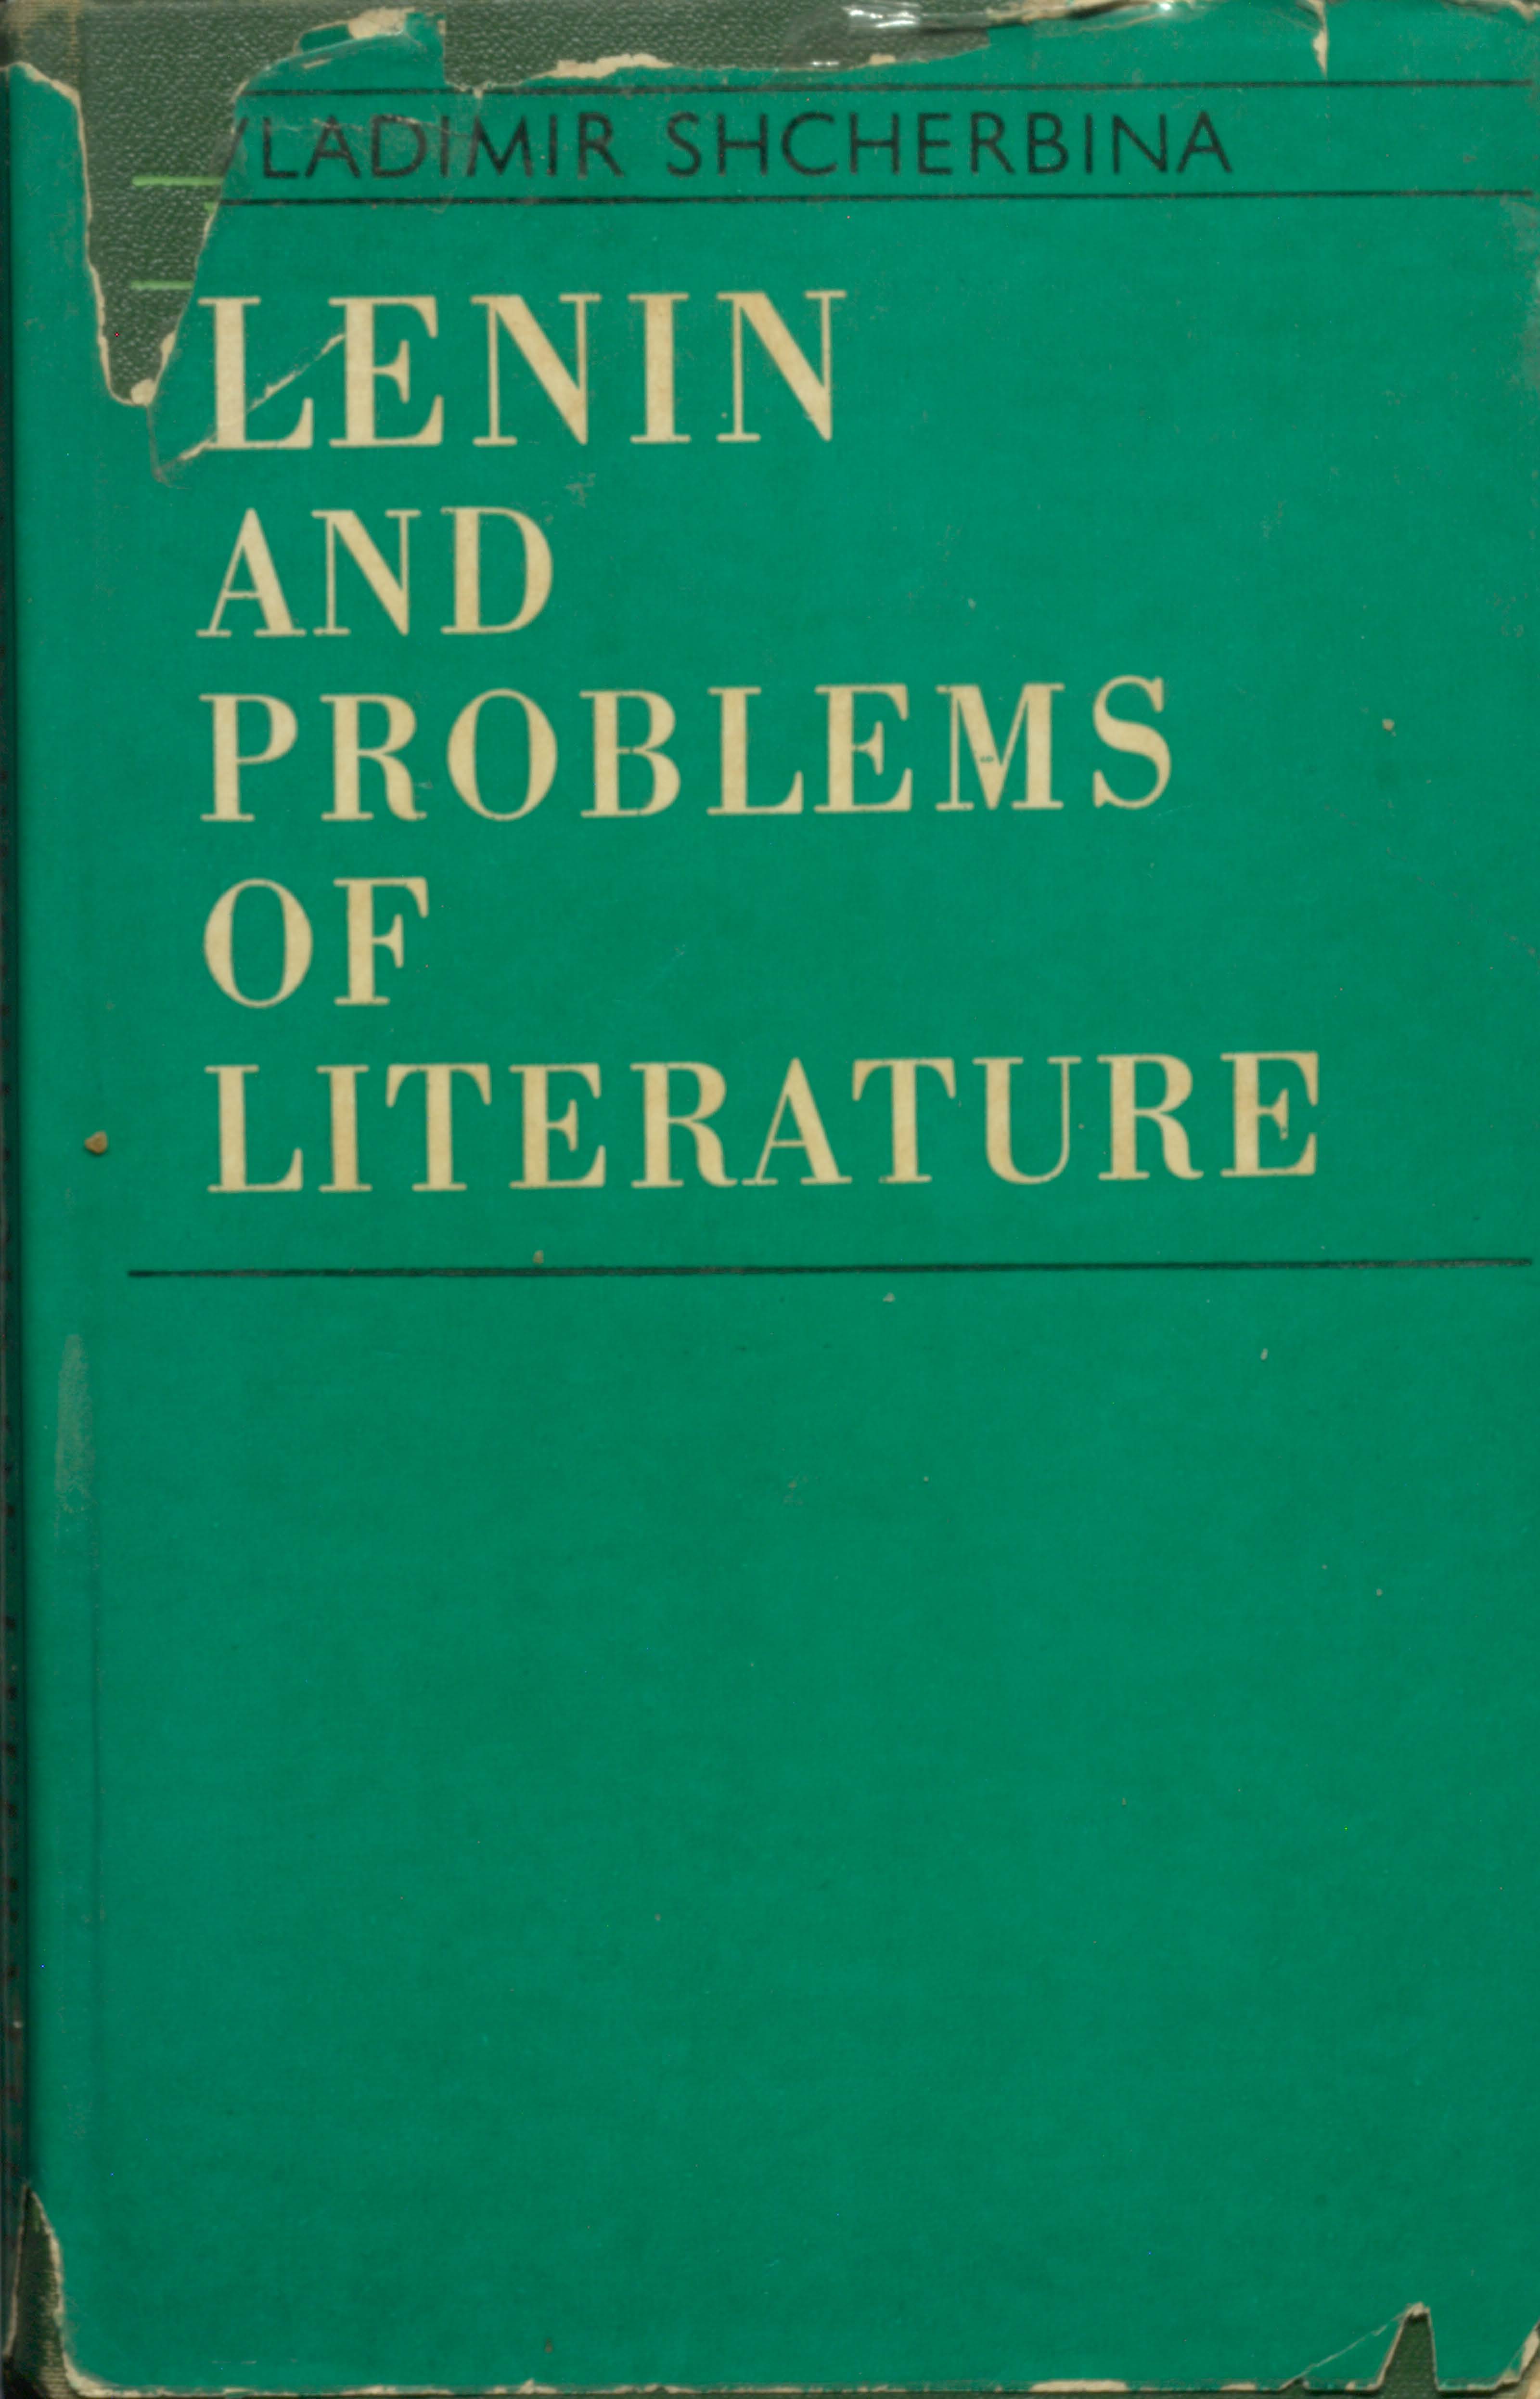 Lenin and problems of literature